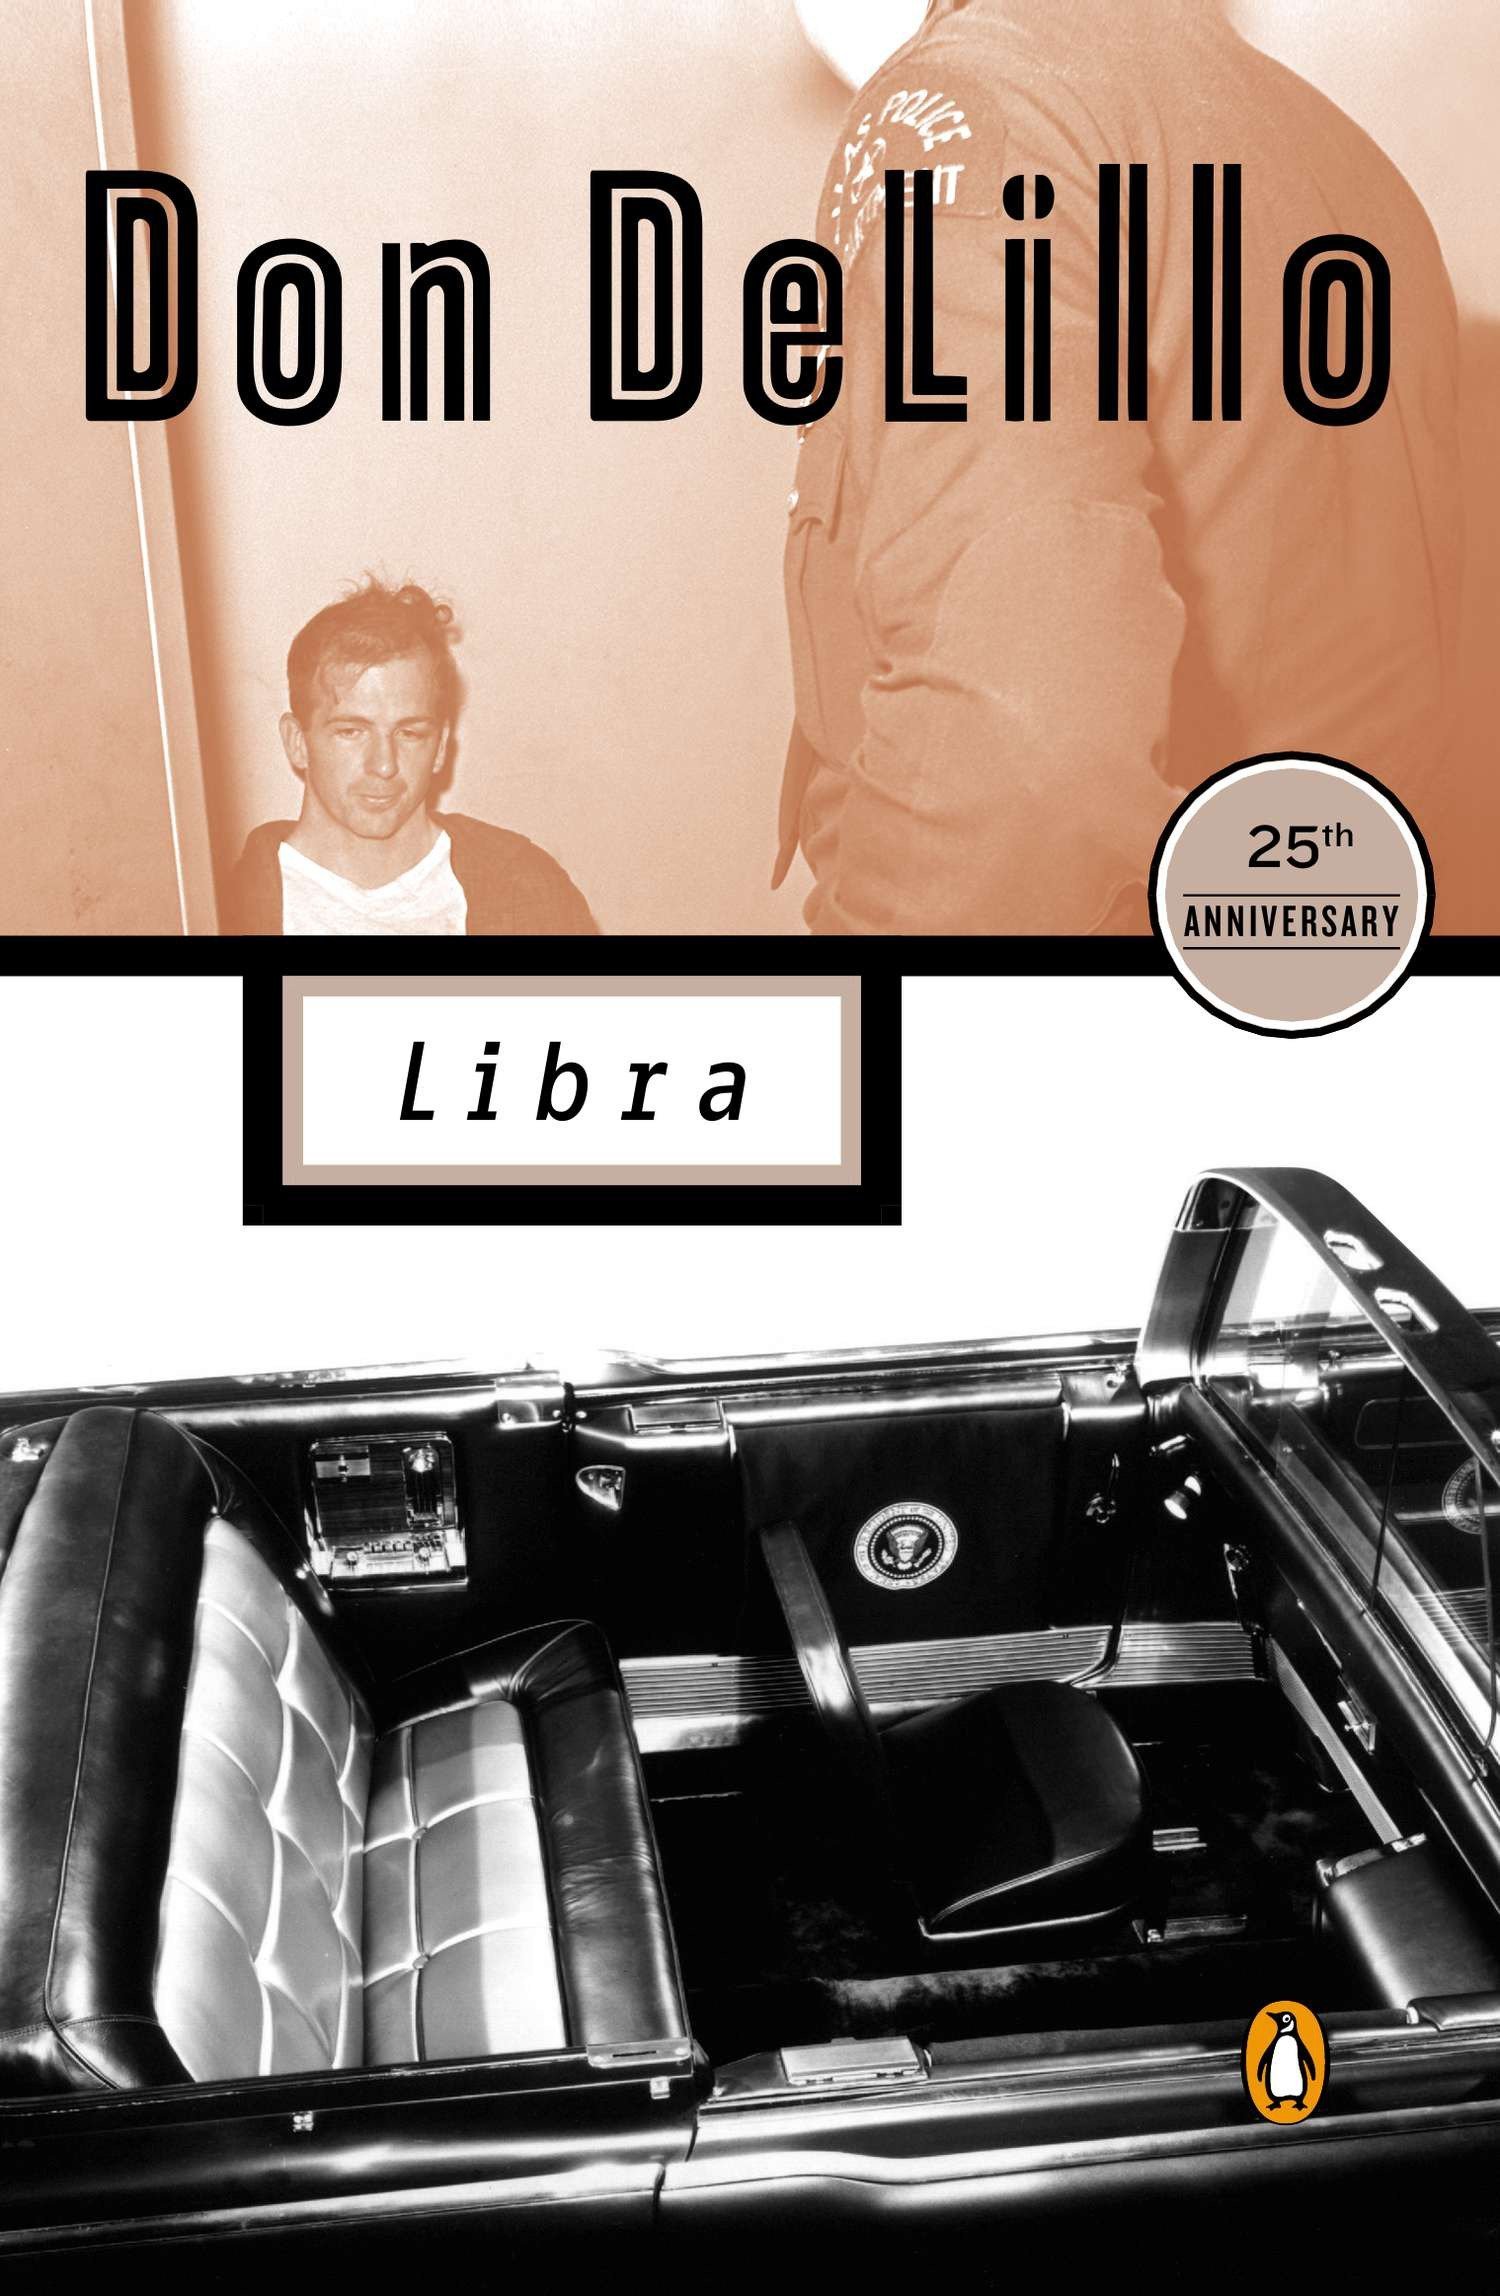 A book cover featuring the title "libra" by don delillo, with the label "25th anniversary" at the top. the cover juxtaposes an image of a man in the upper half against a black-and-white photo of a classic convertible car's interior in the lower half, representing themes potentially explored in the novel.